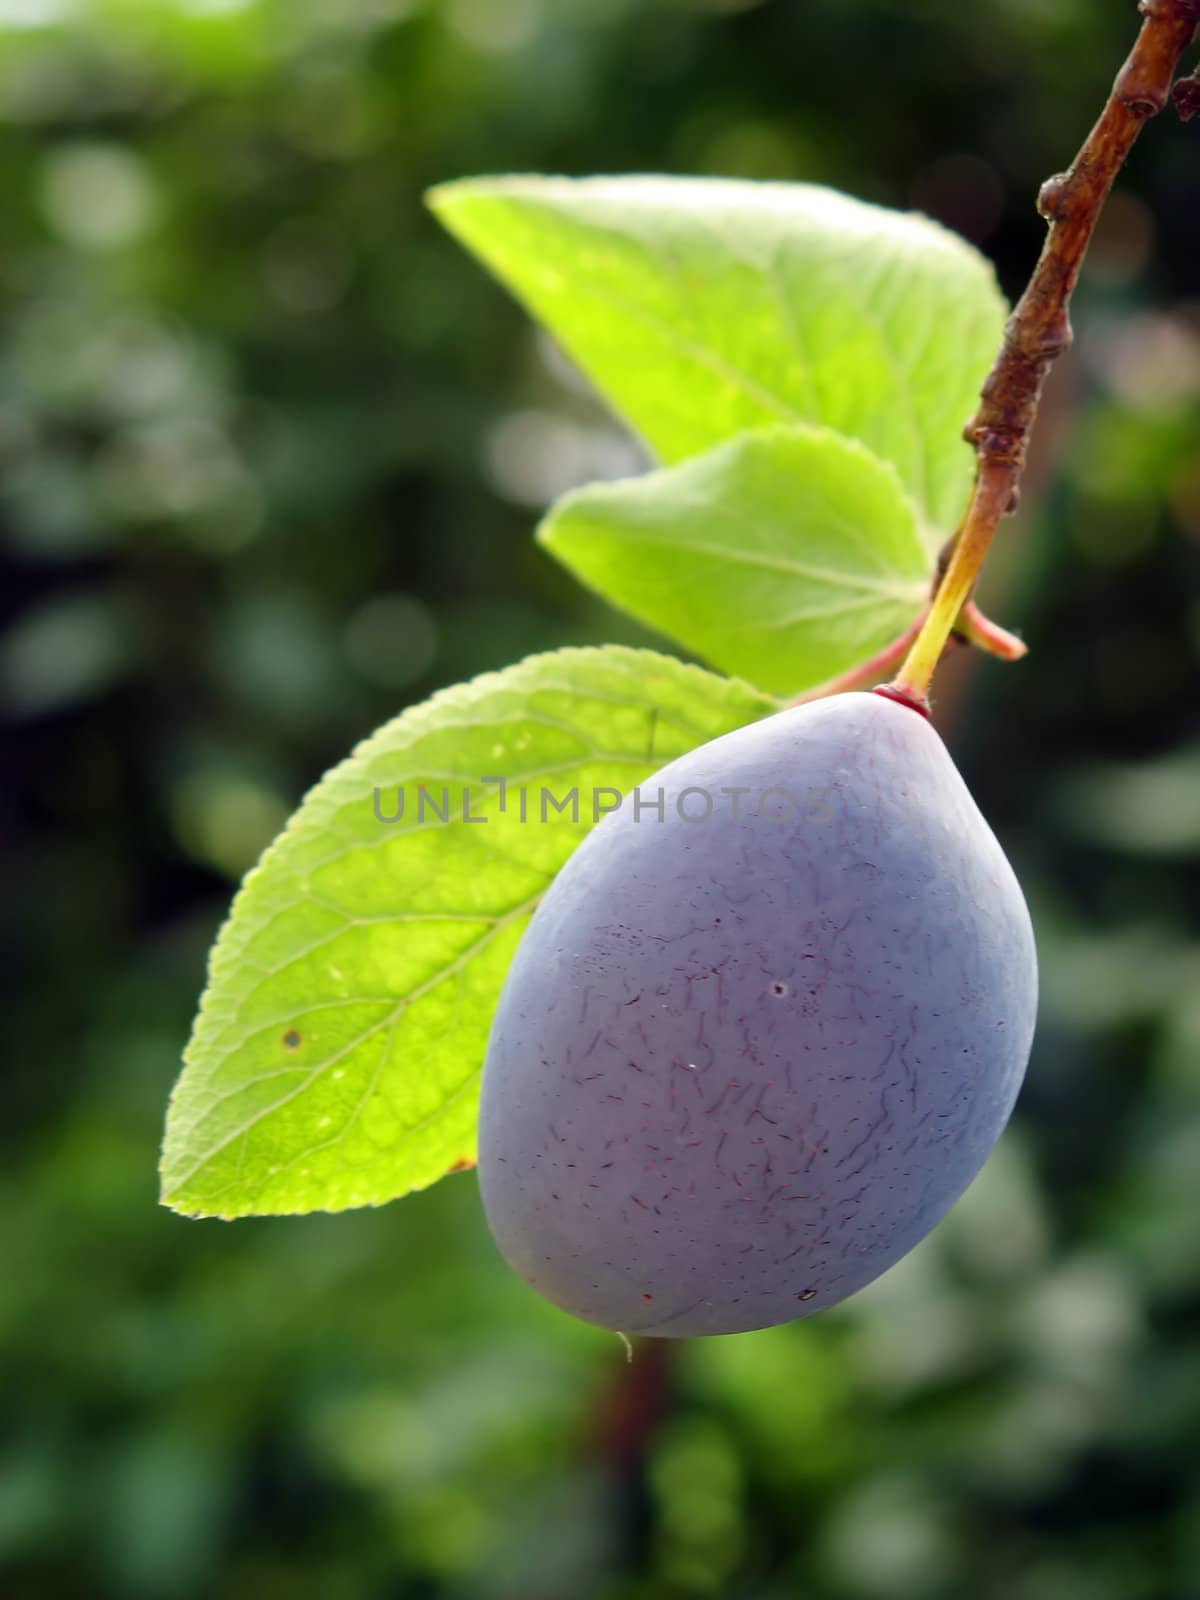 This image shows a macro from a plum